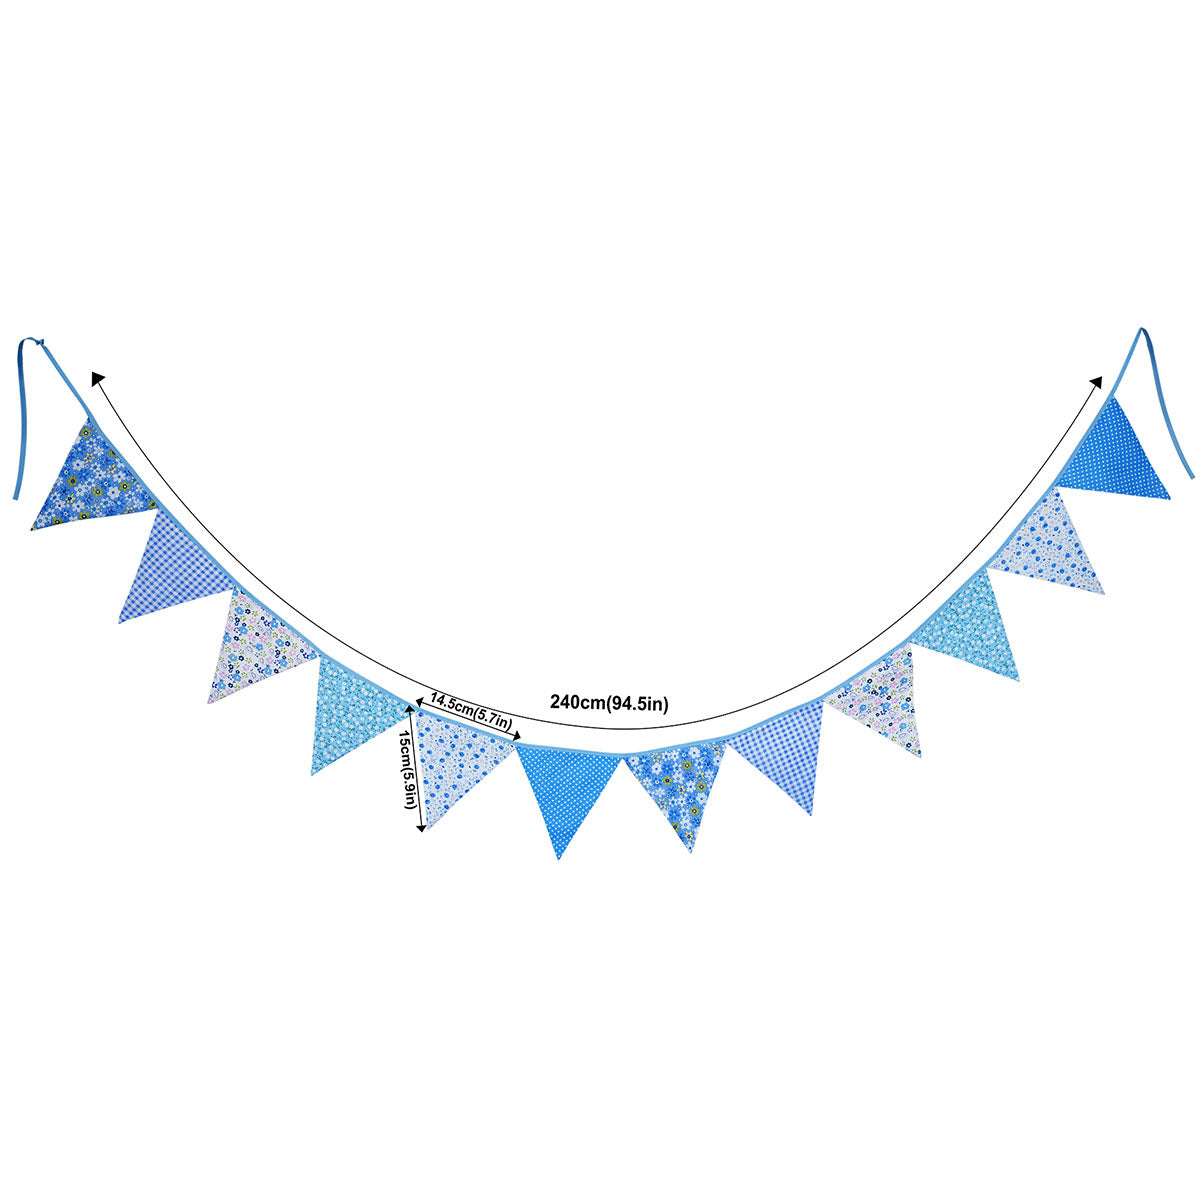 2 Blue Cotton Pennant Banners